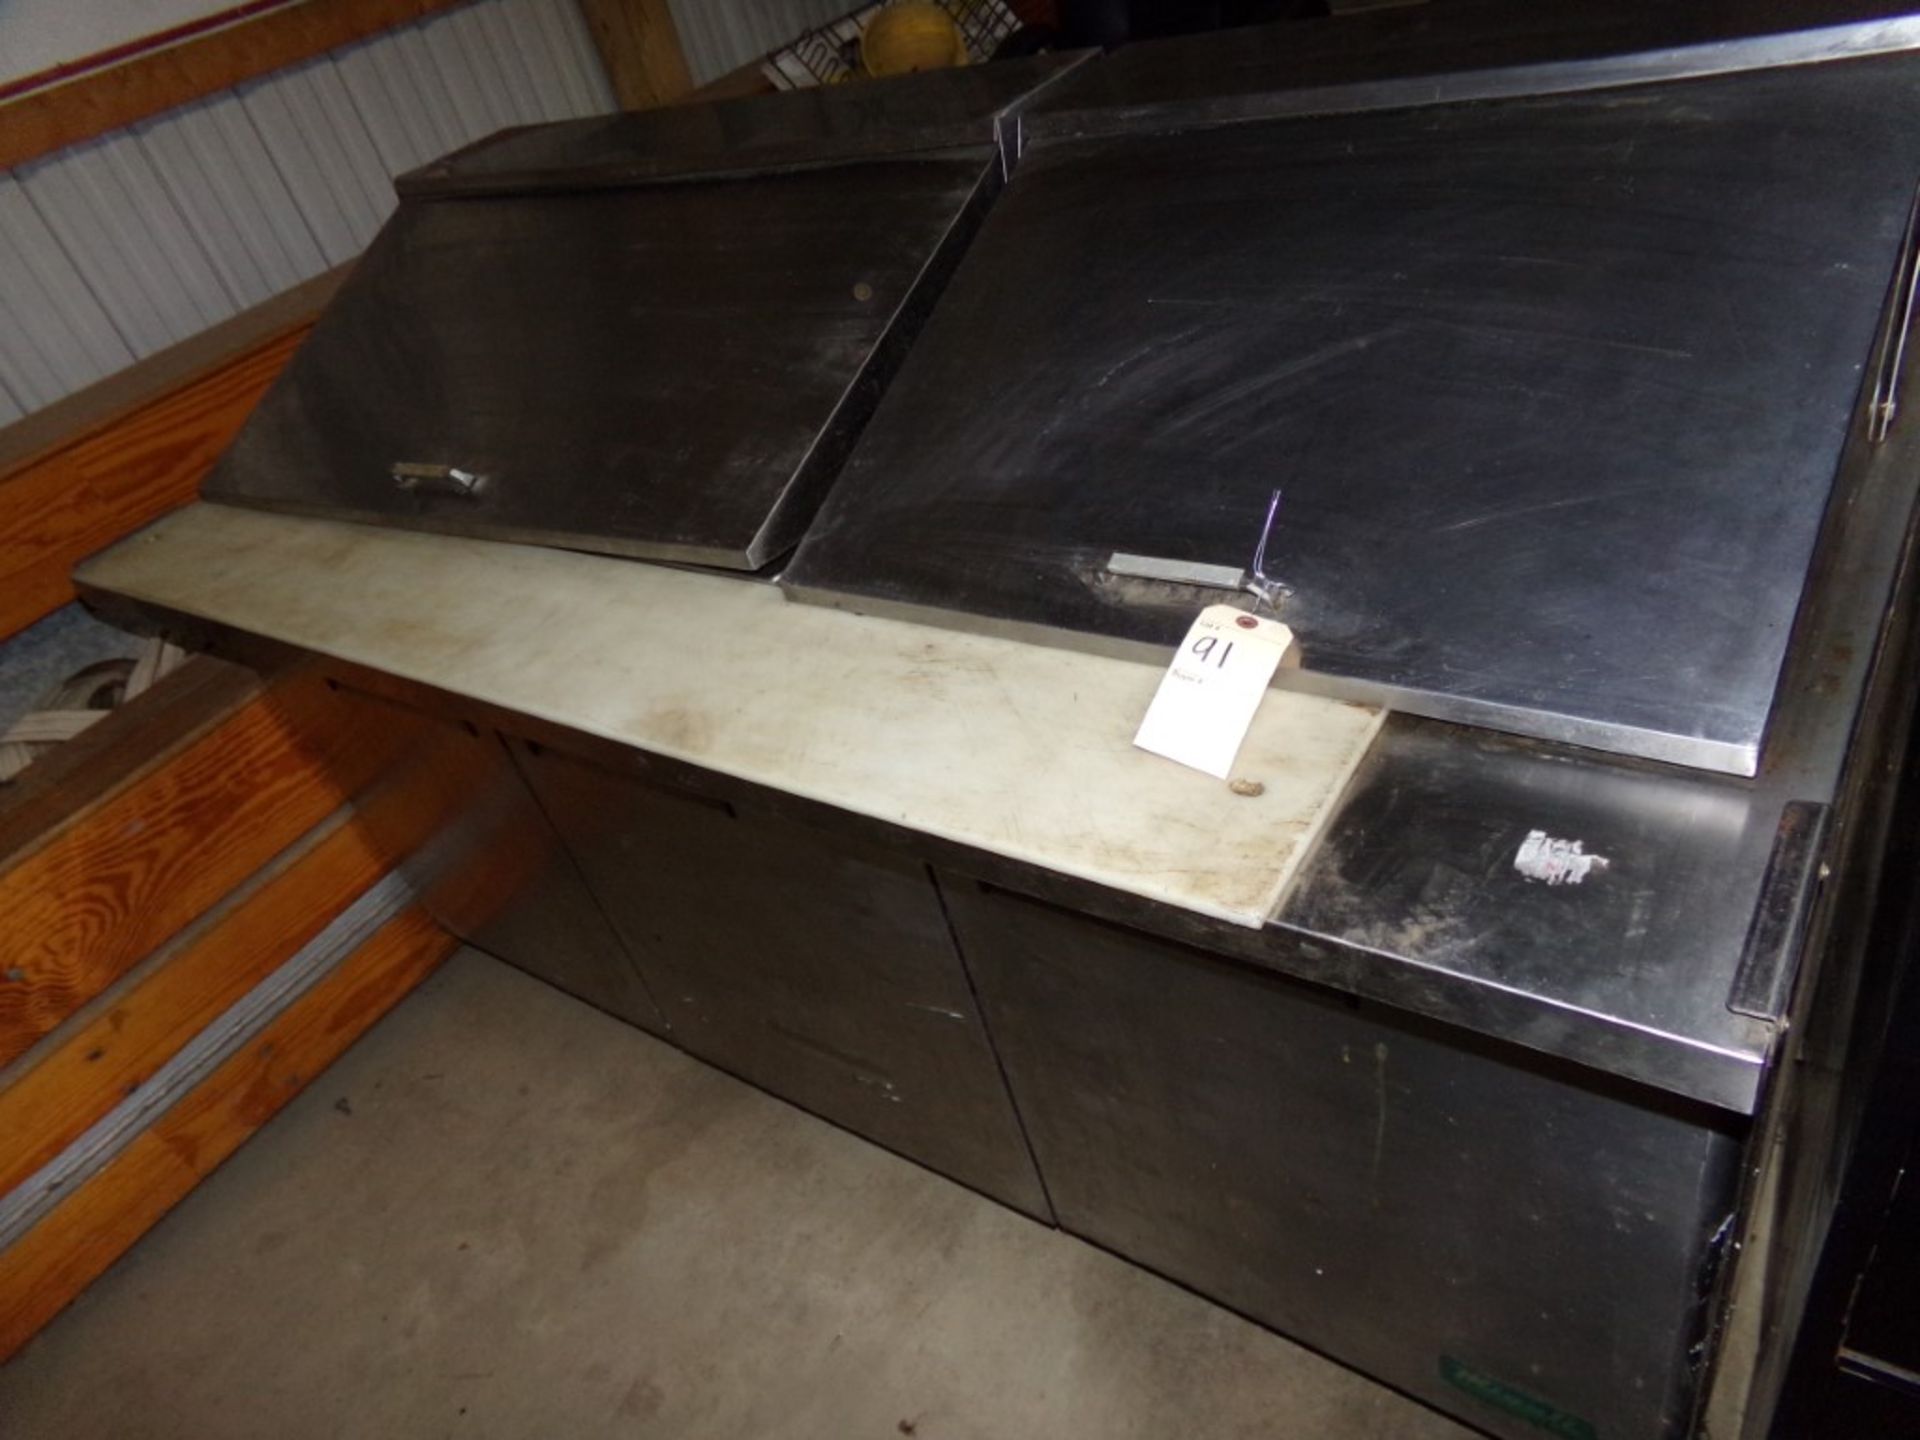 Refrigerated Sandwich Station, Magali, With (5) S.S. Pans, 73'' X 34'' X 47'', 110V